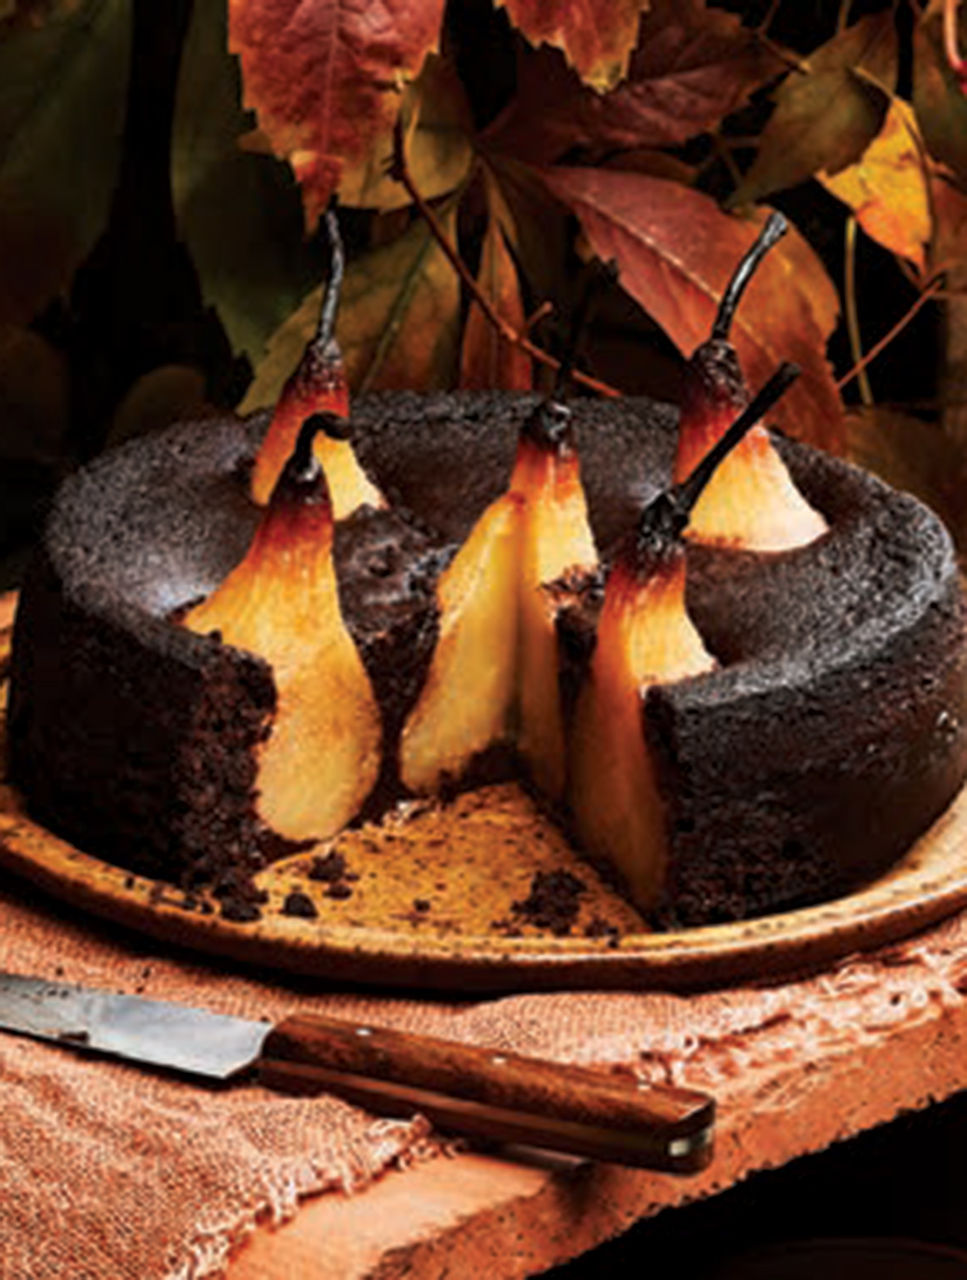 Strenna Pear and Chocolate Fiasconaro - Basket with Panettone and Grappa